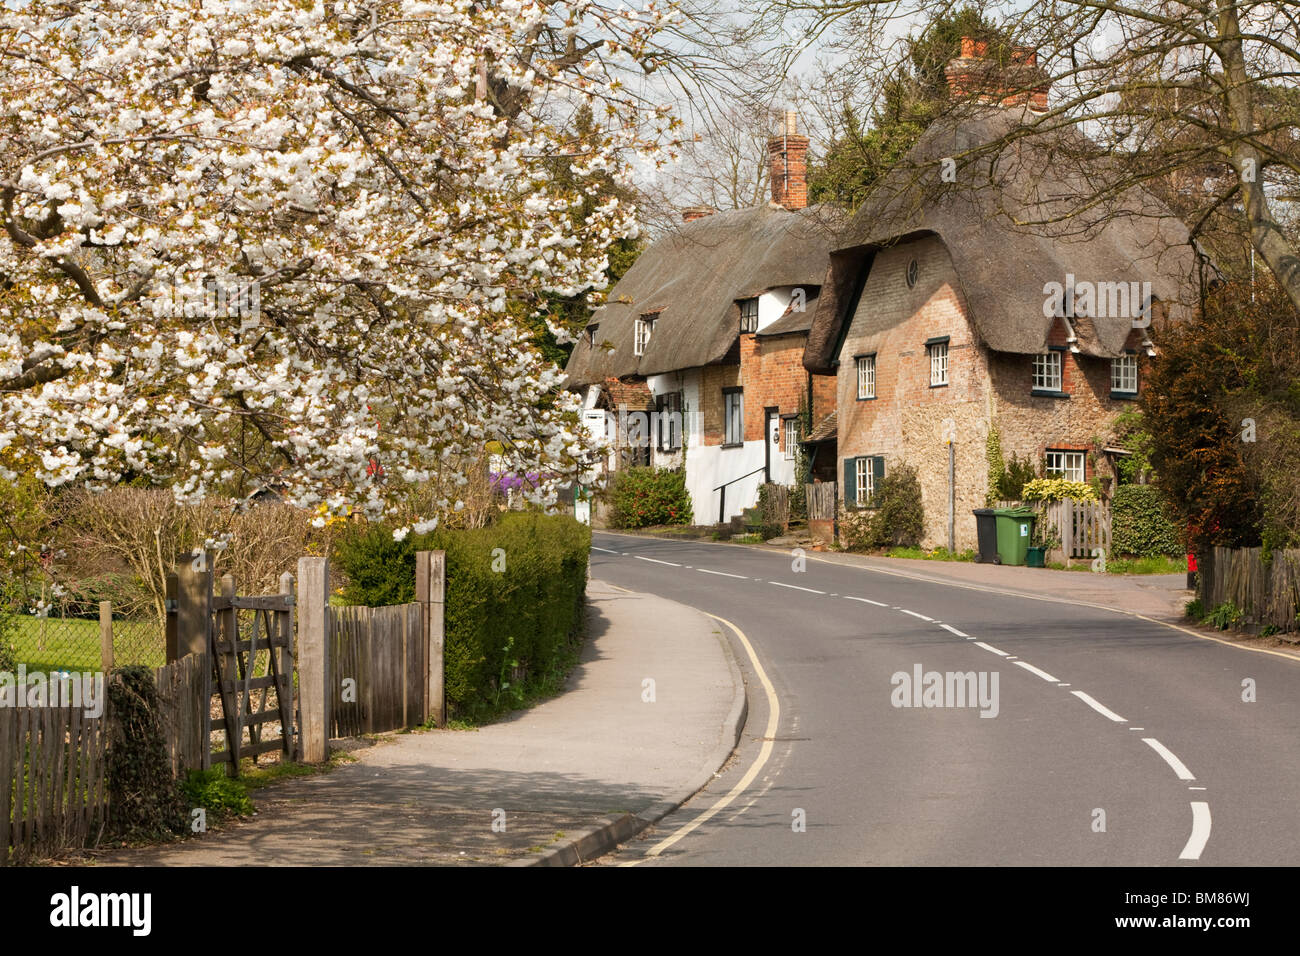 Spring blossom and traditional thatched cottages in the Thameside village of Clifton Hampden in Oxfordshire, Uk Stock Photo